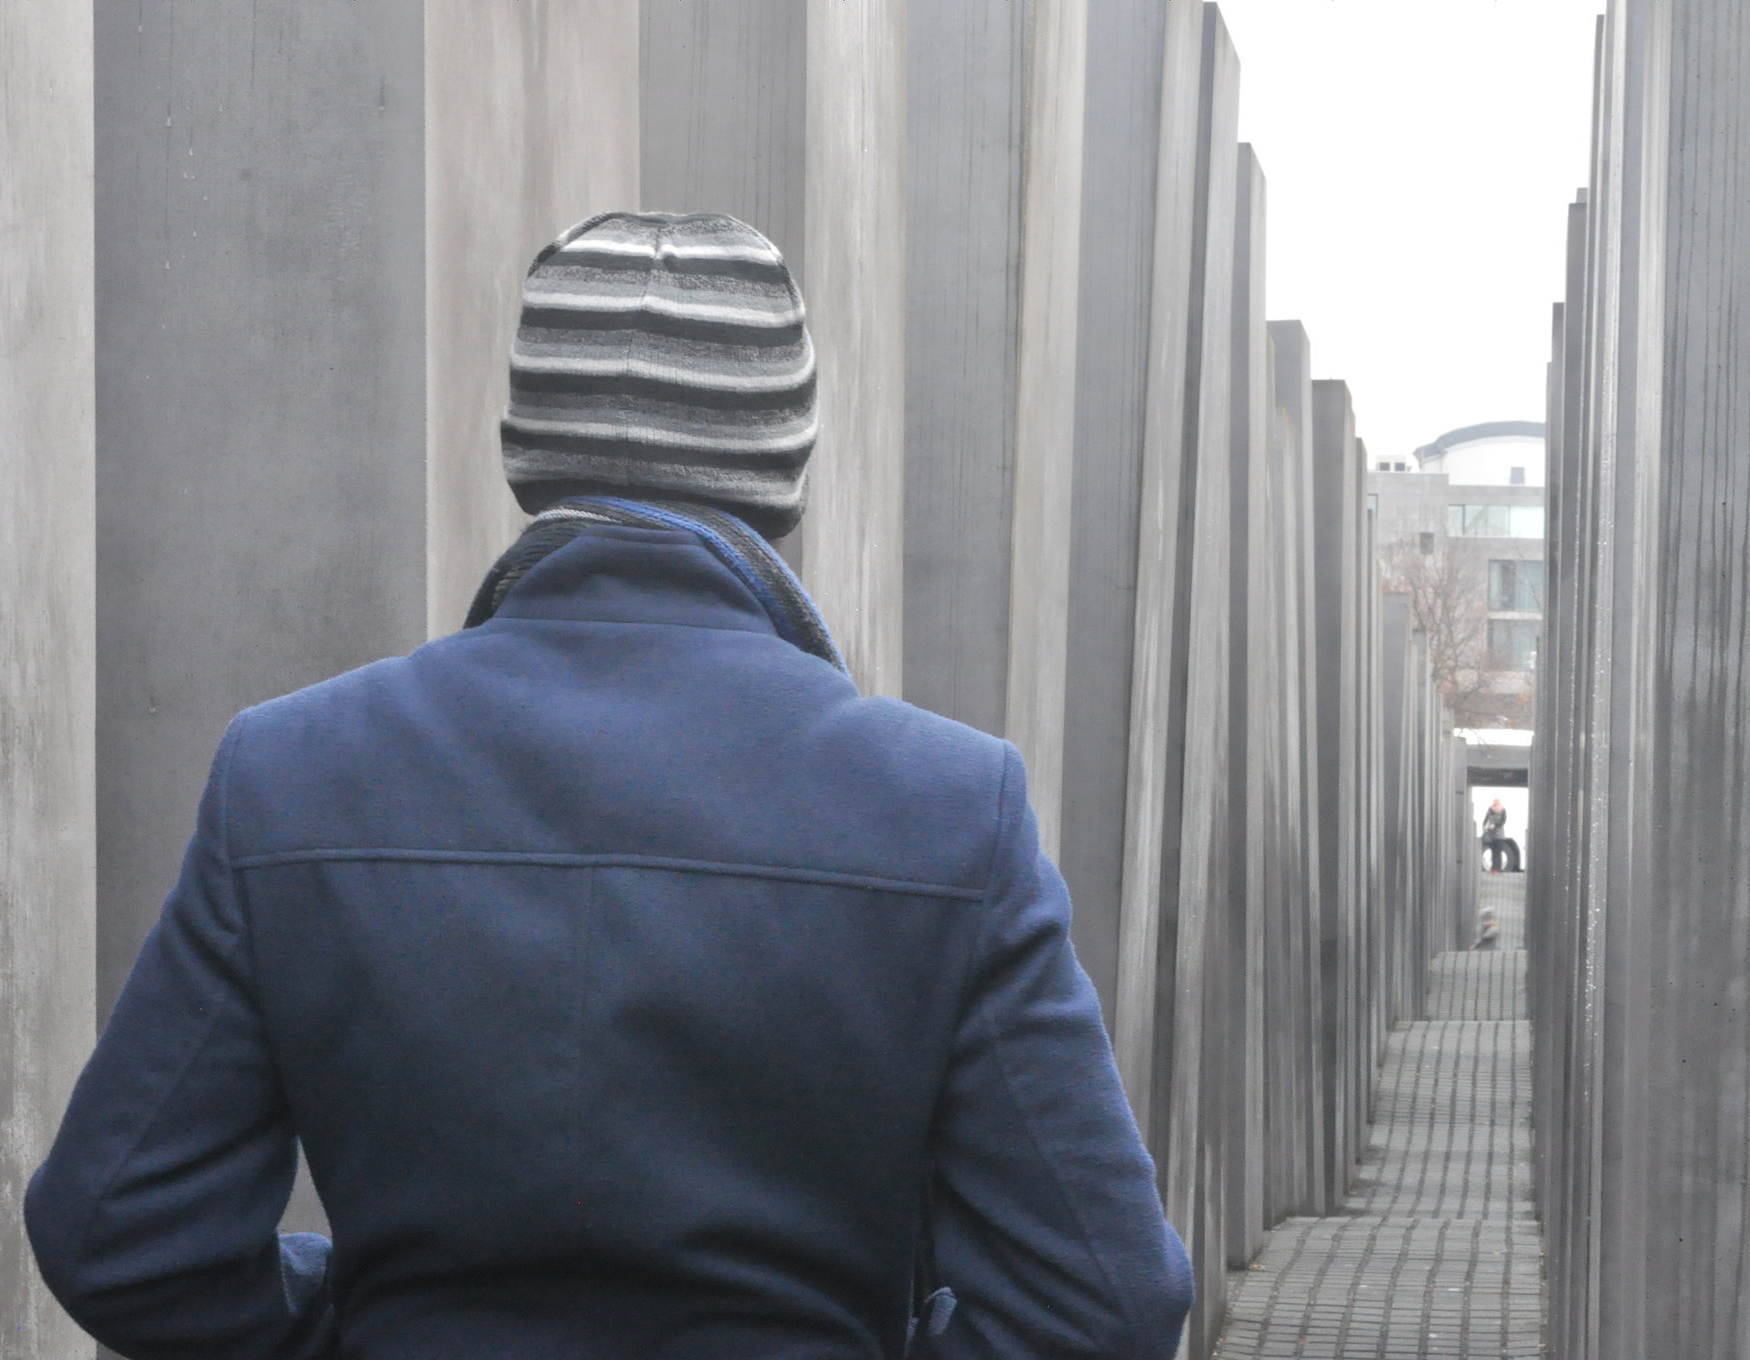 At the Memorial to the Murdered Jews of Europe in Berlin. 